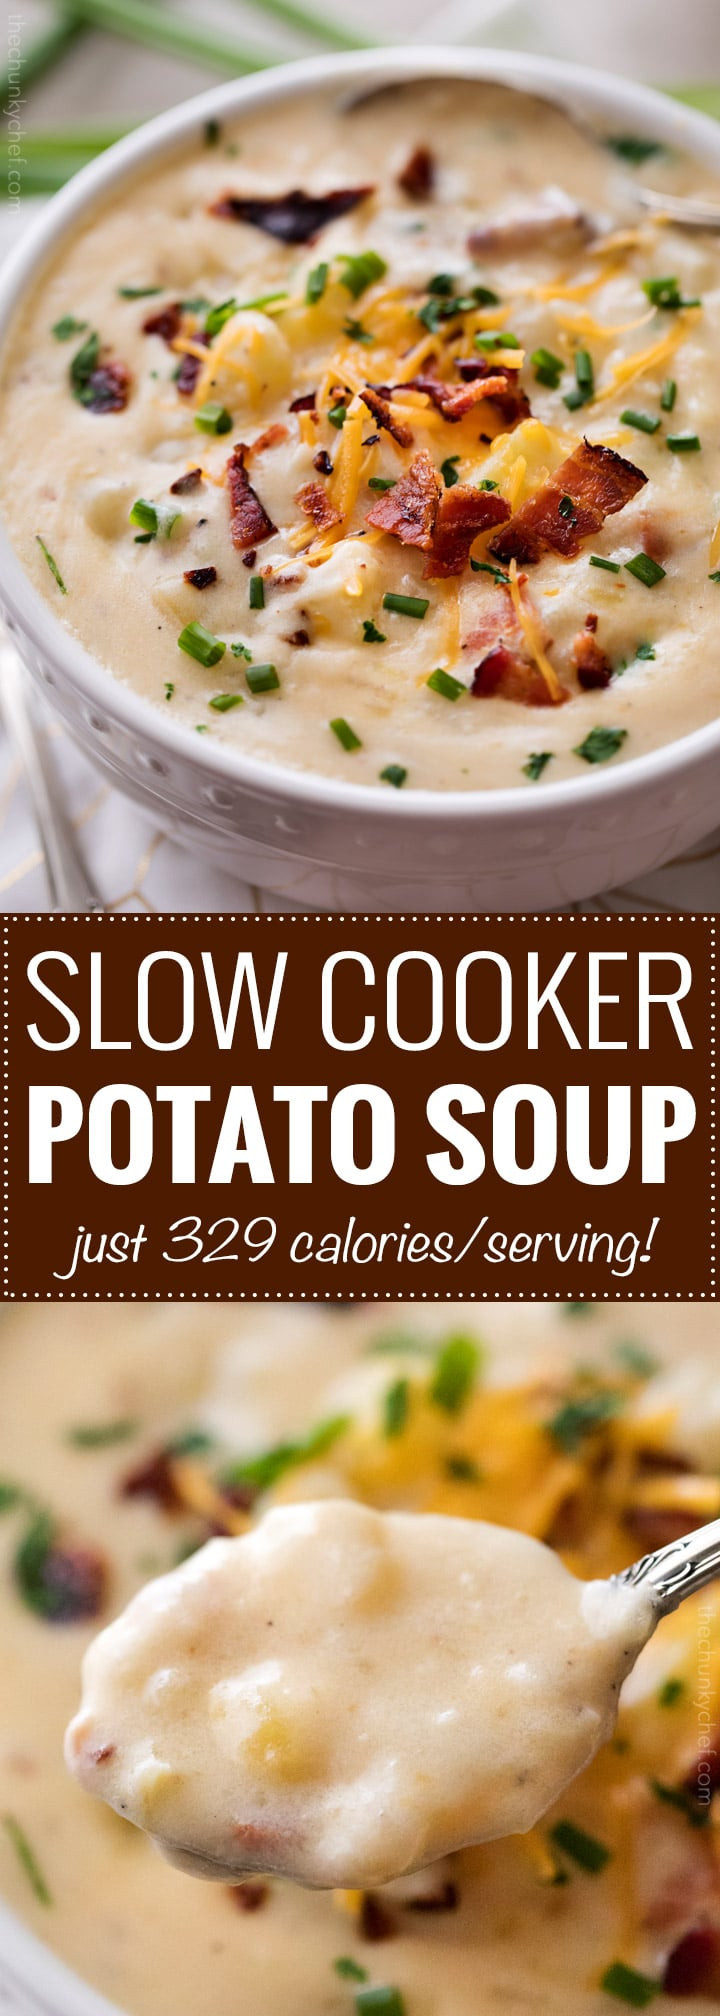 Low Calorie Soup Recipes For Slow Cookers
 Skinny Slow Cooker Potato Soup